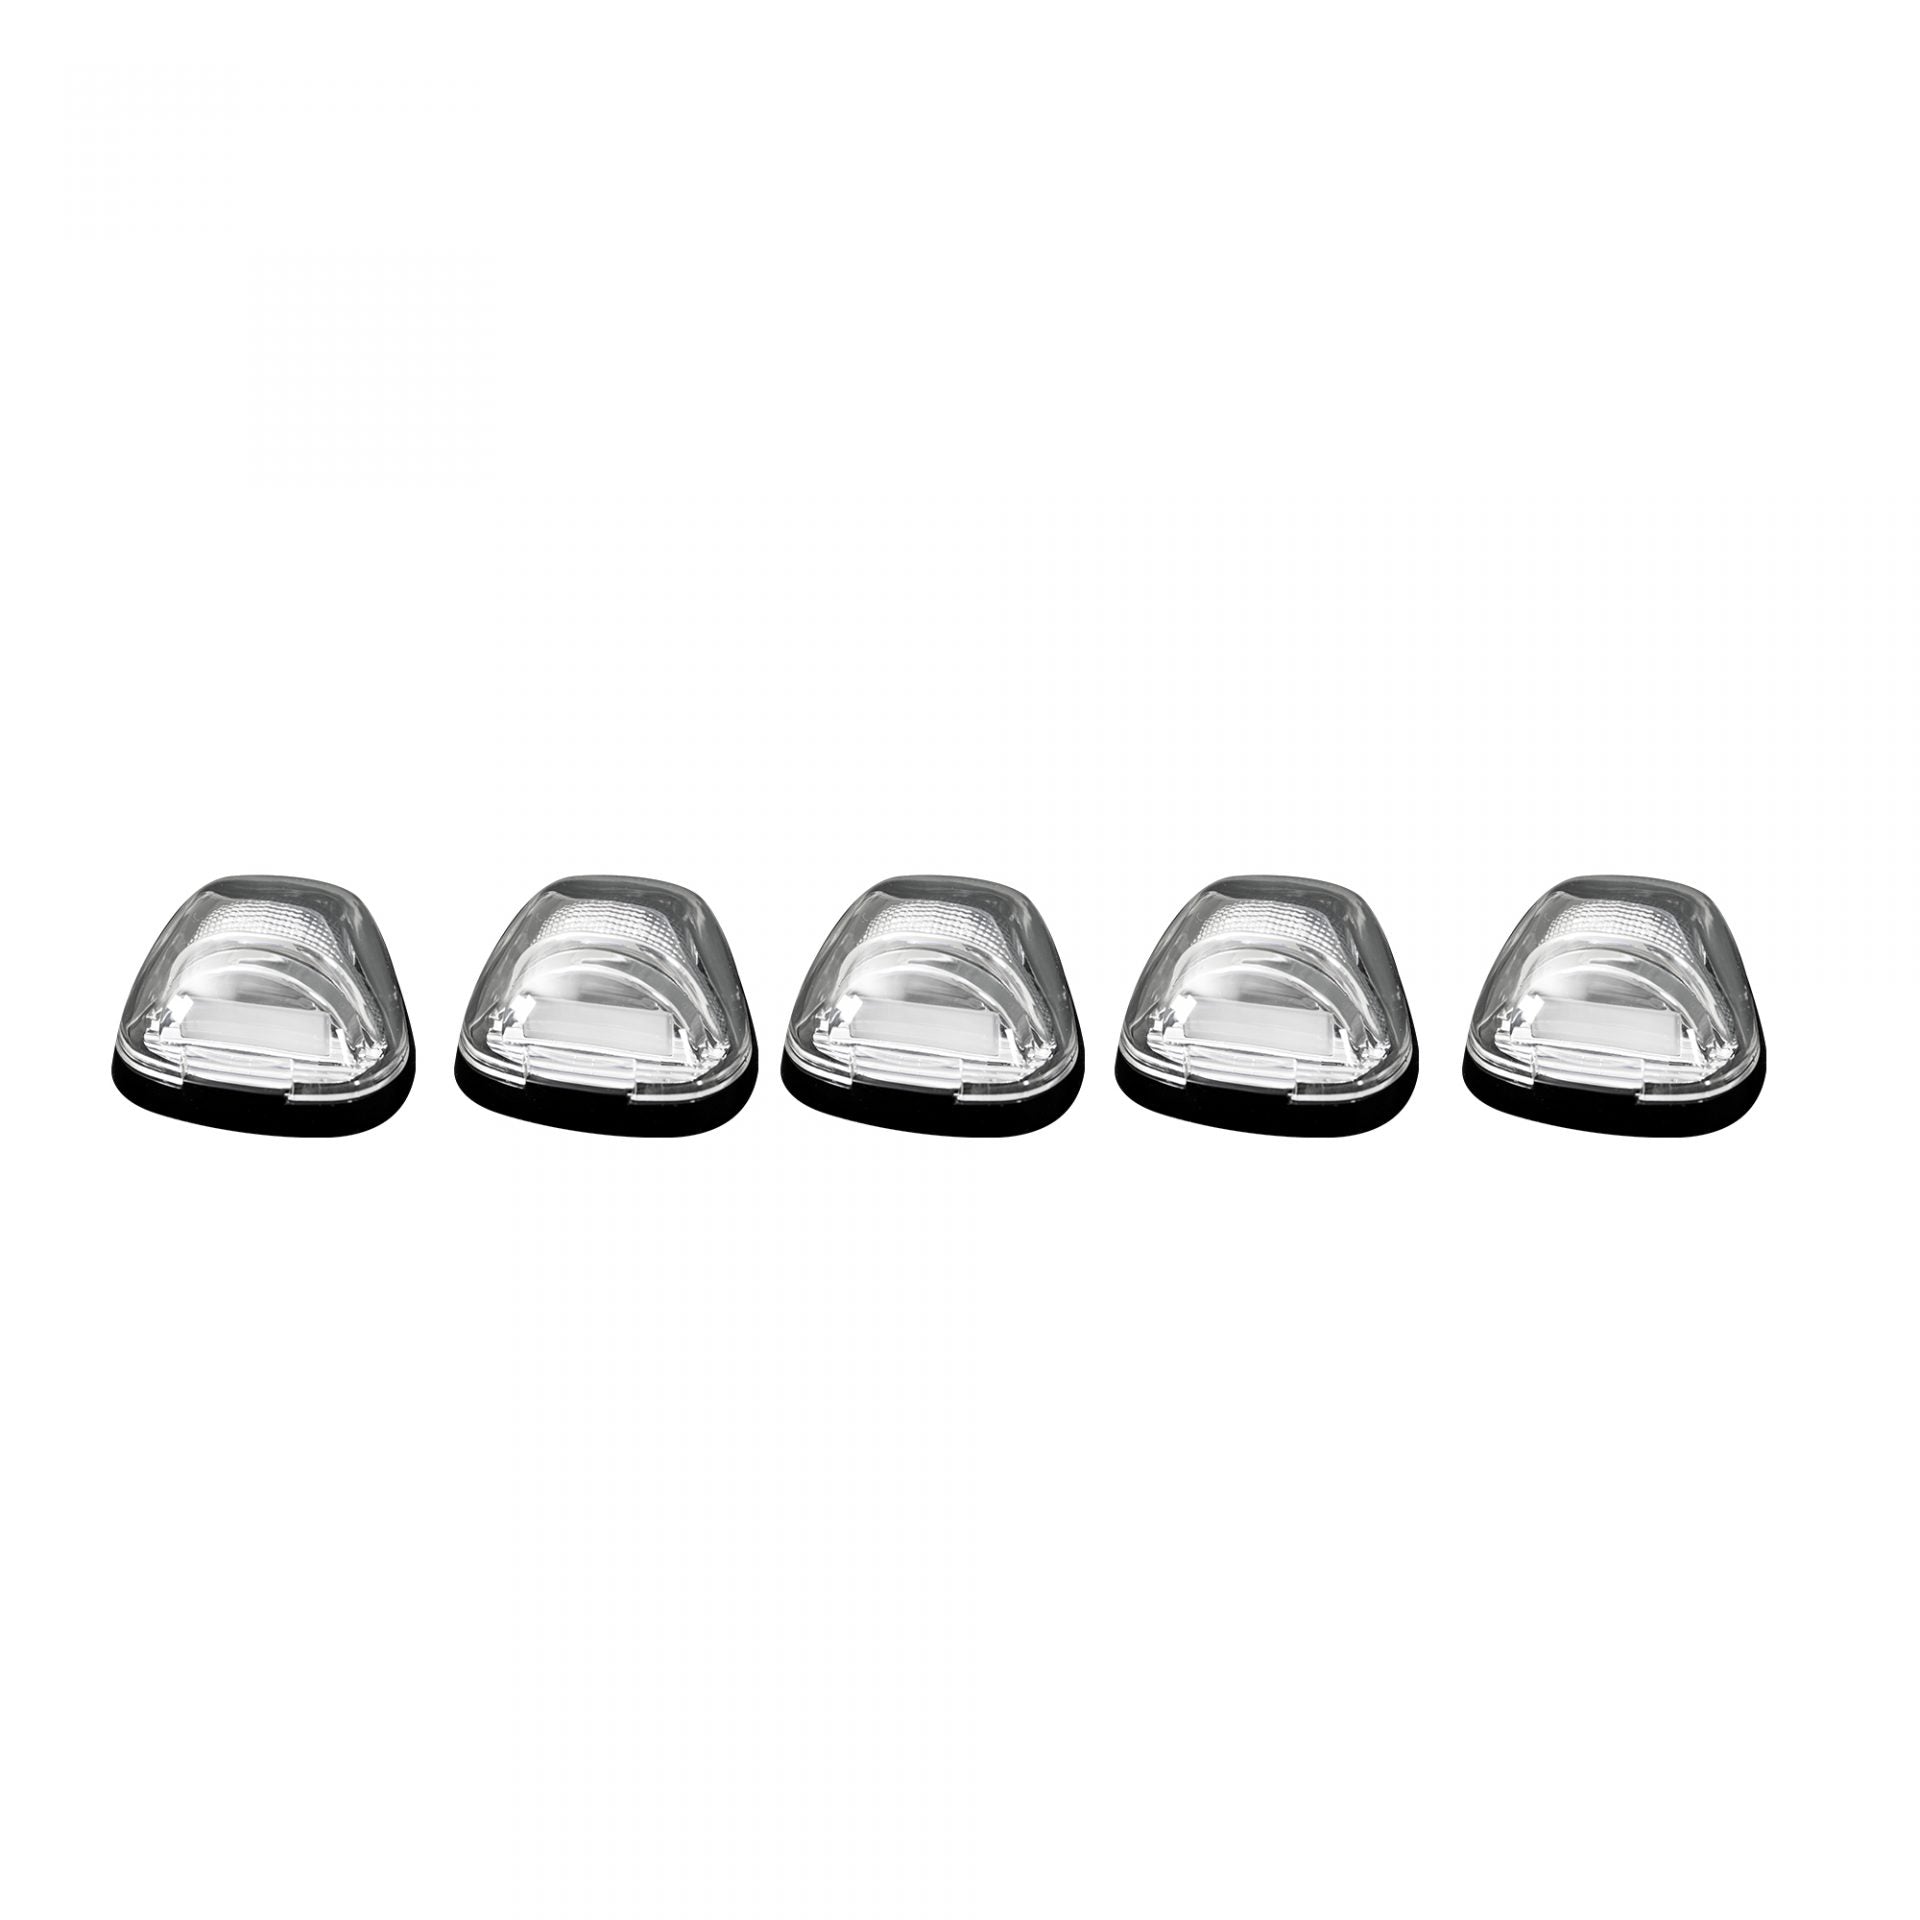 Ford Super Duty 99-16 5 Piece Cab Light Set OLED Clear Lens in Amber